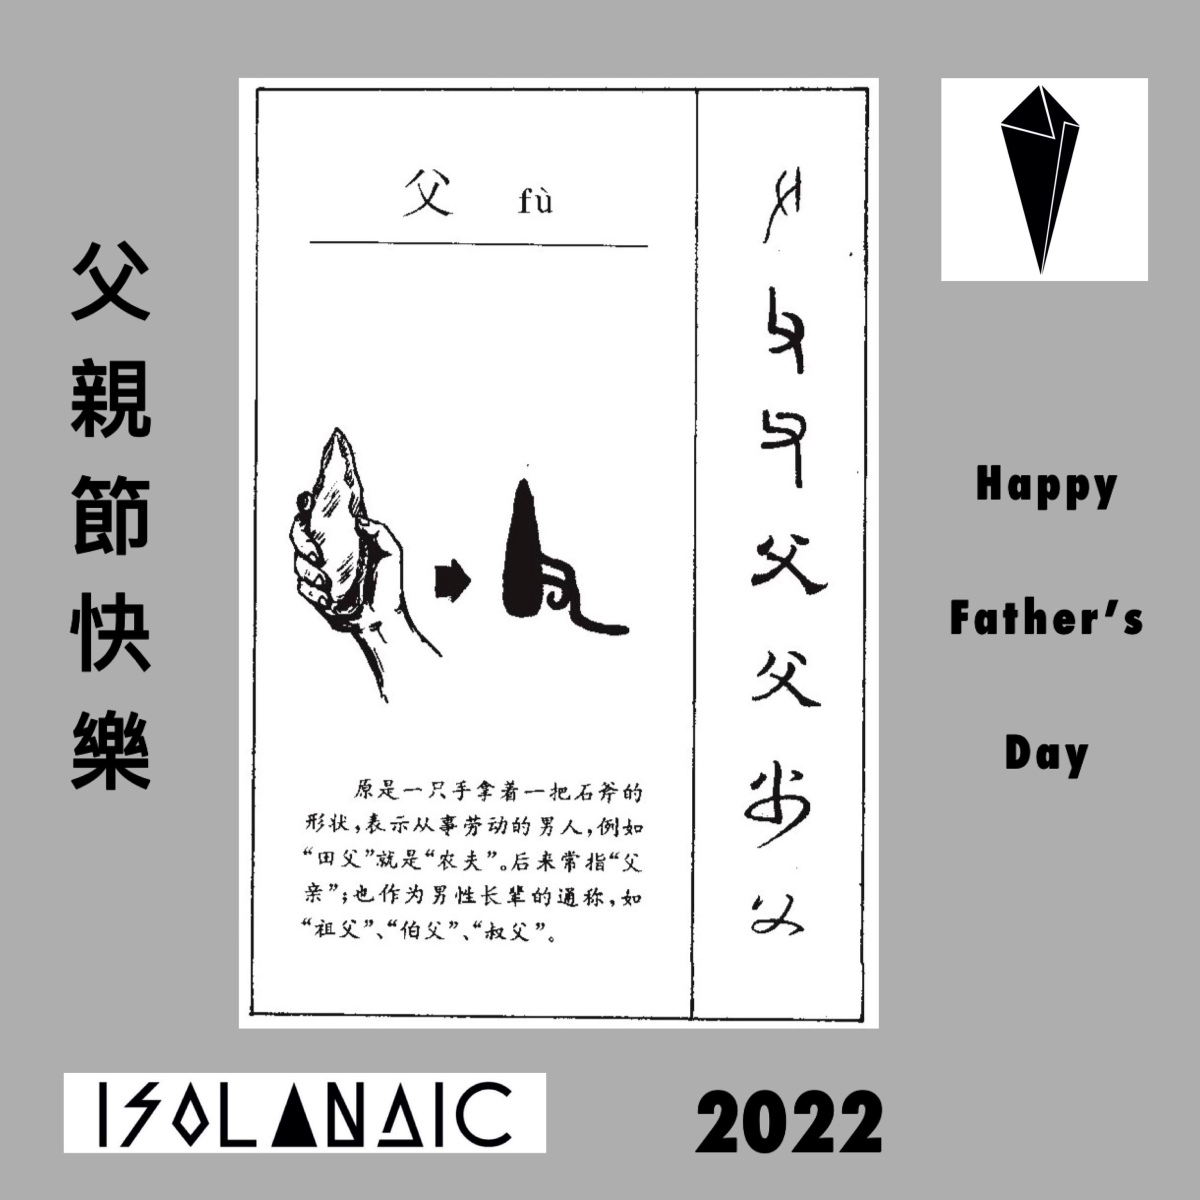 Happy Father’s Day 2022